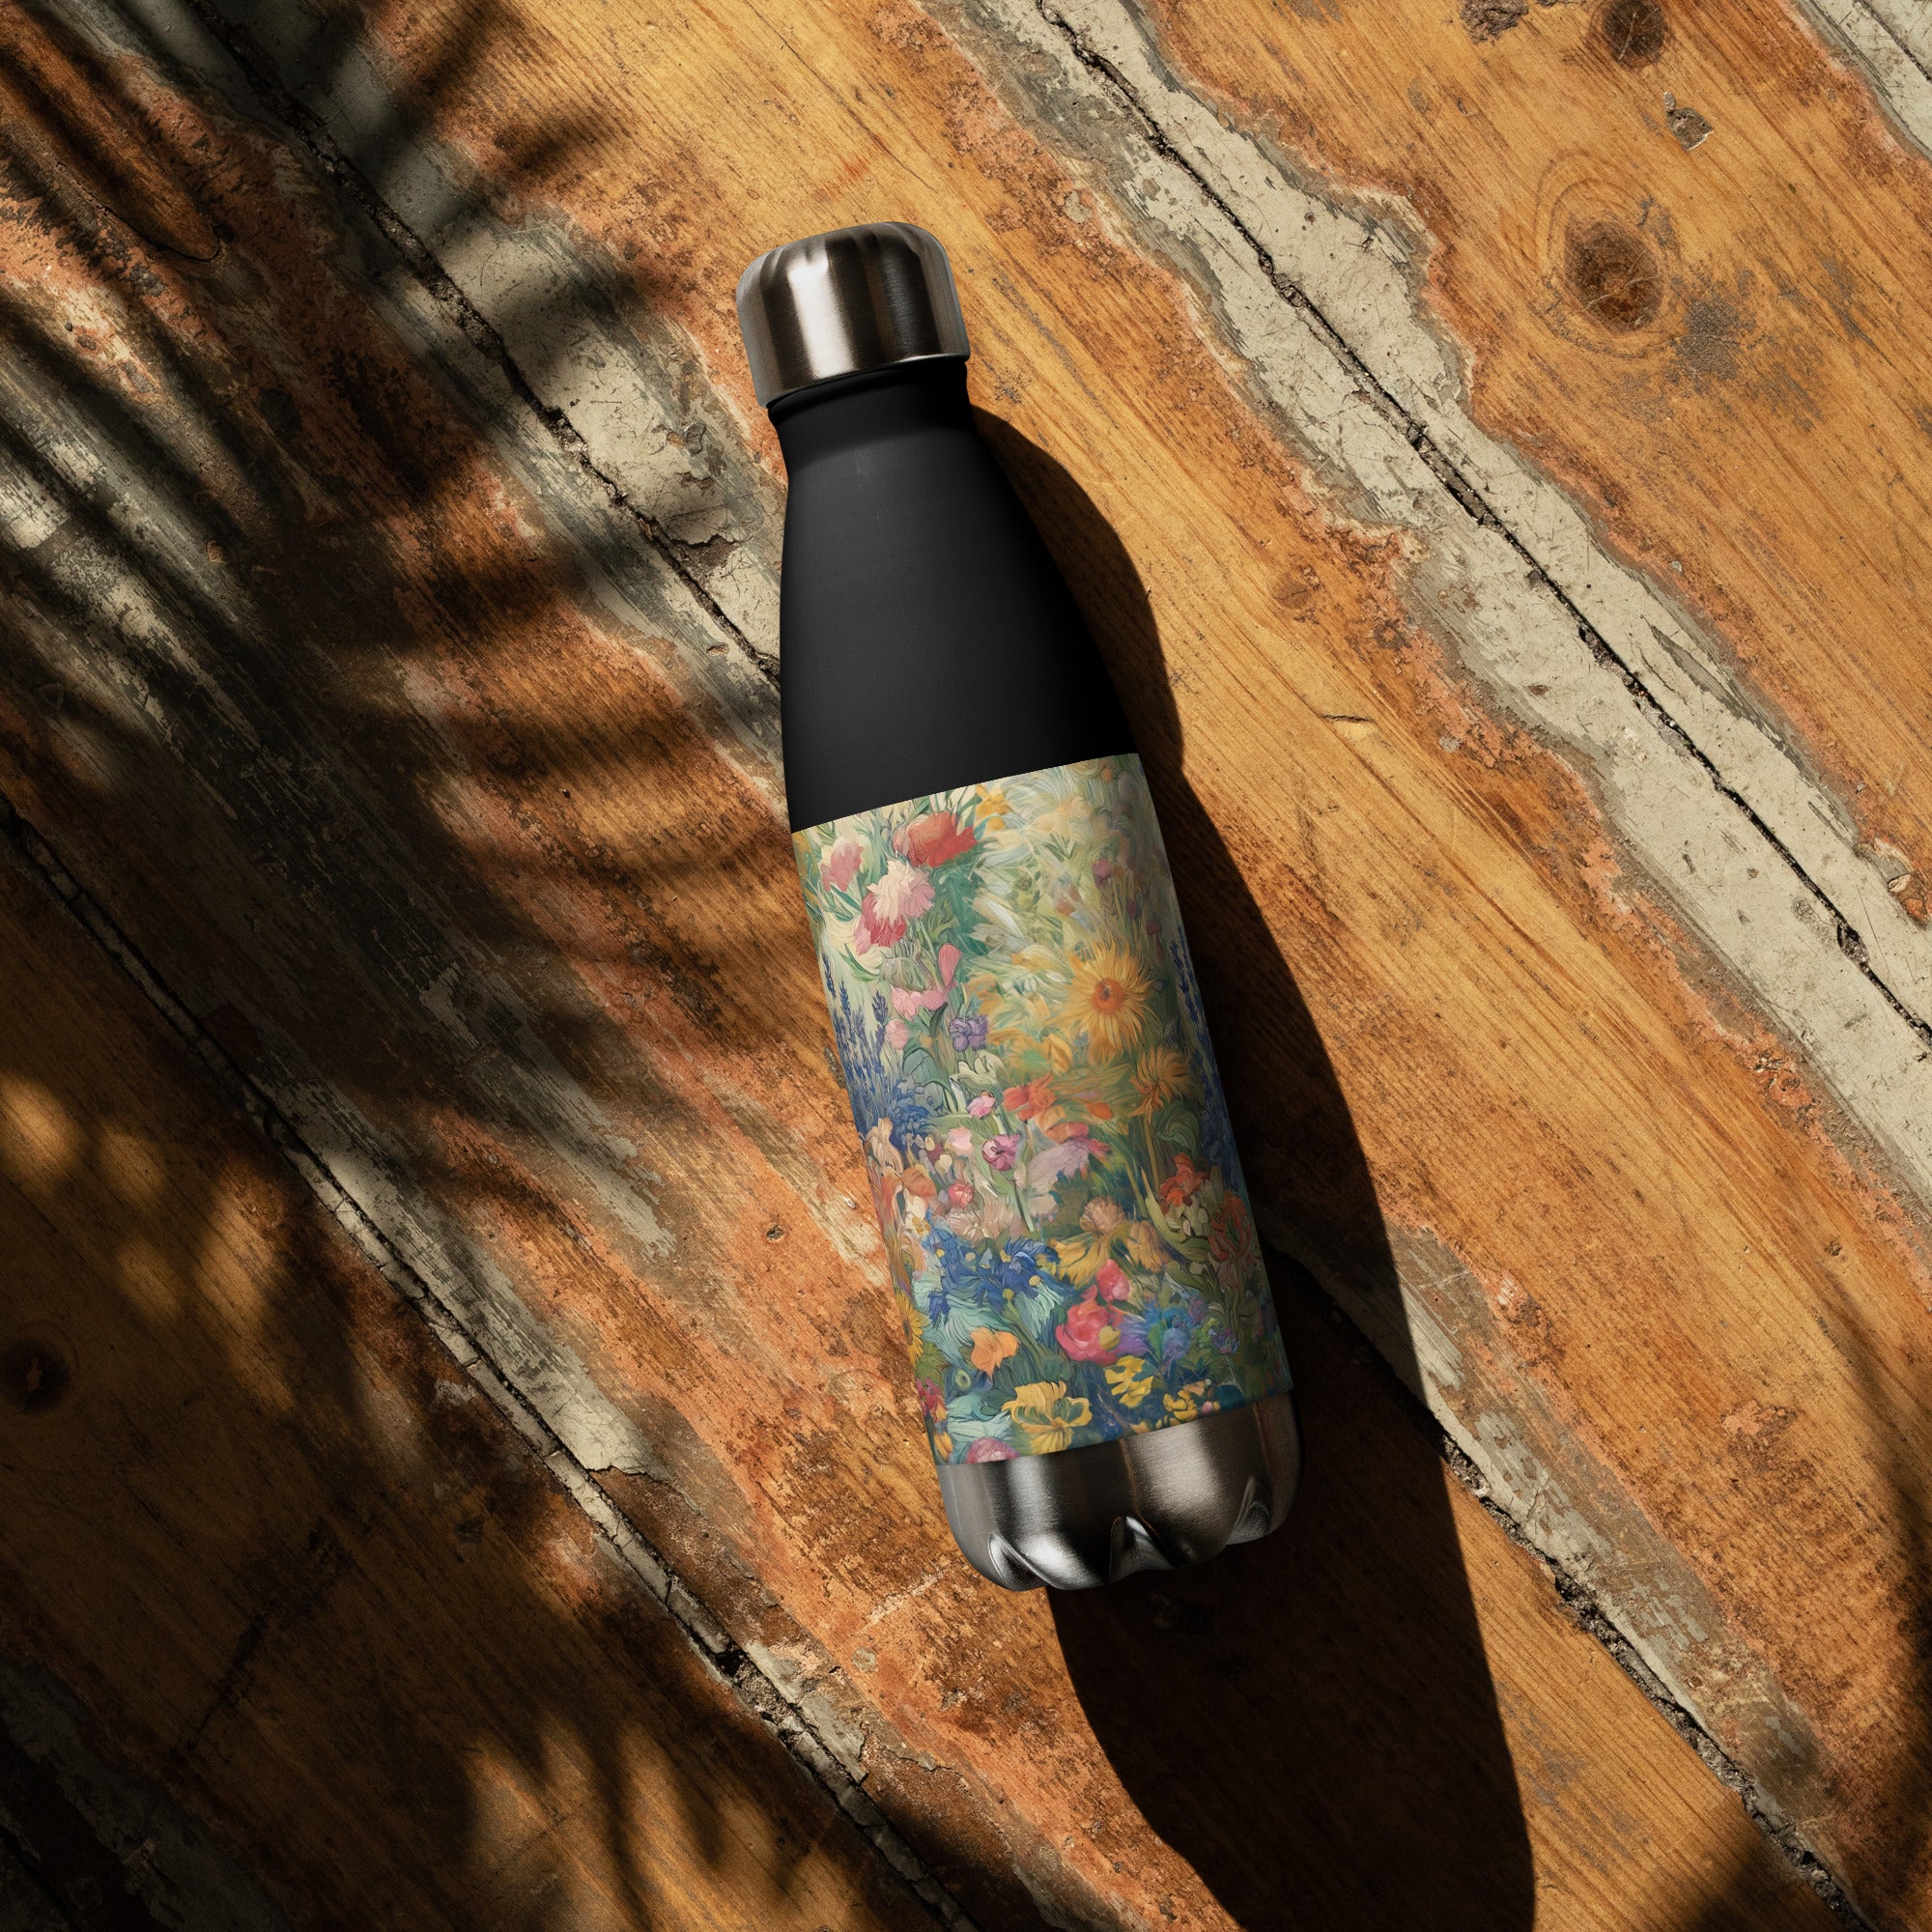 Vincent van Gogh 'Garden at Arles' Famous Painting Water Bottle | Stainless Steel Art Water Bottle